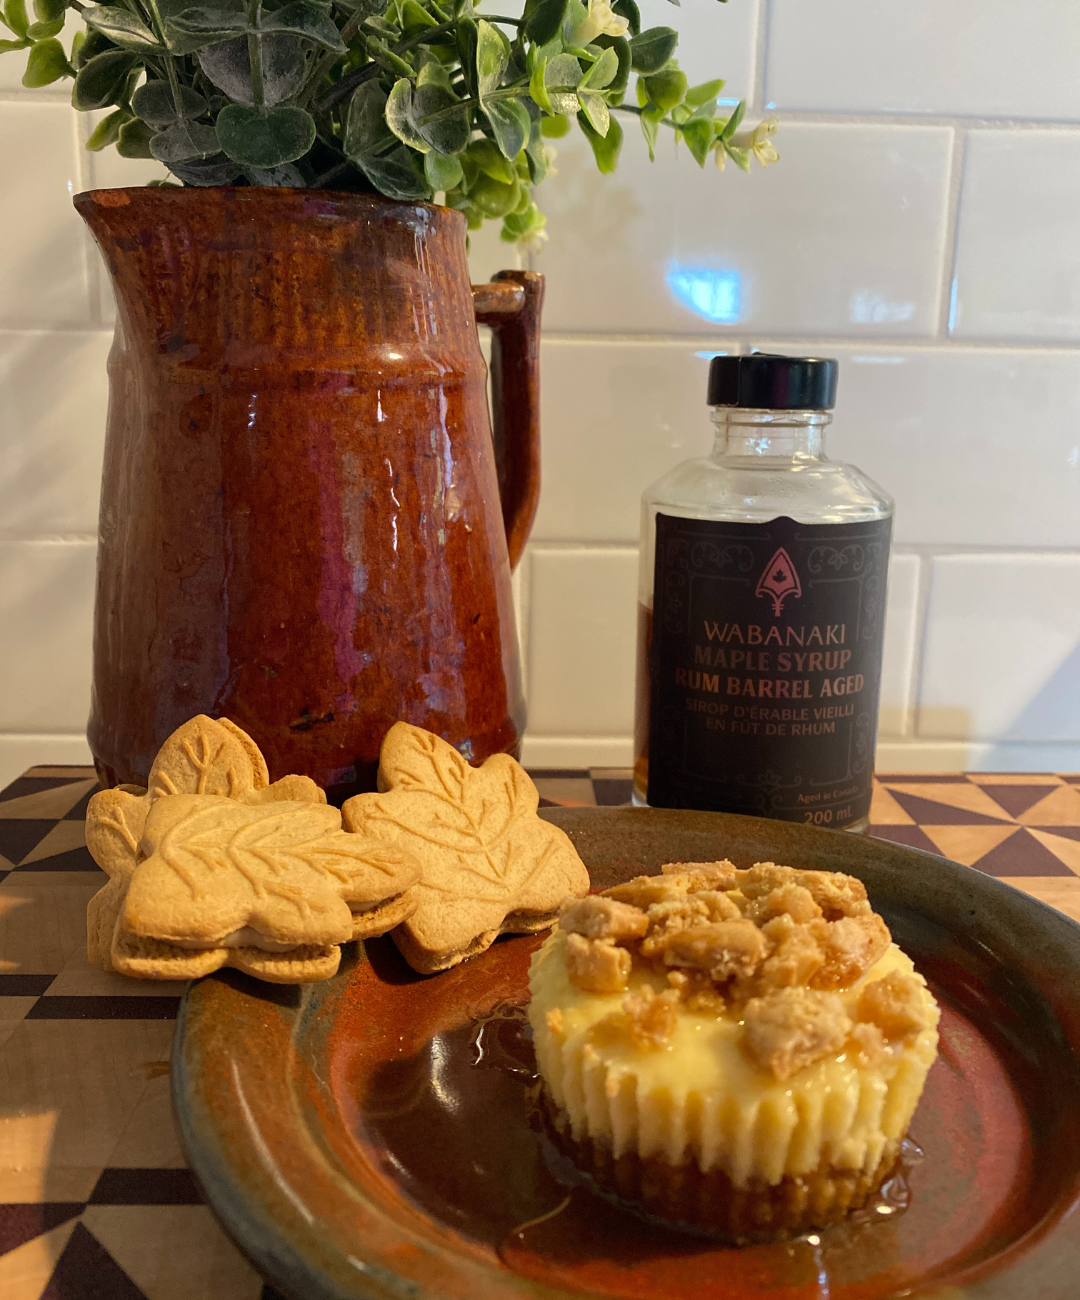 Mini Cheesecakes made with Barrel Aged Rum Maple Syrup